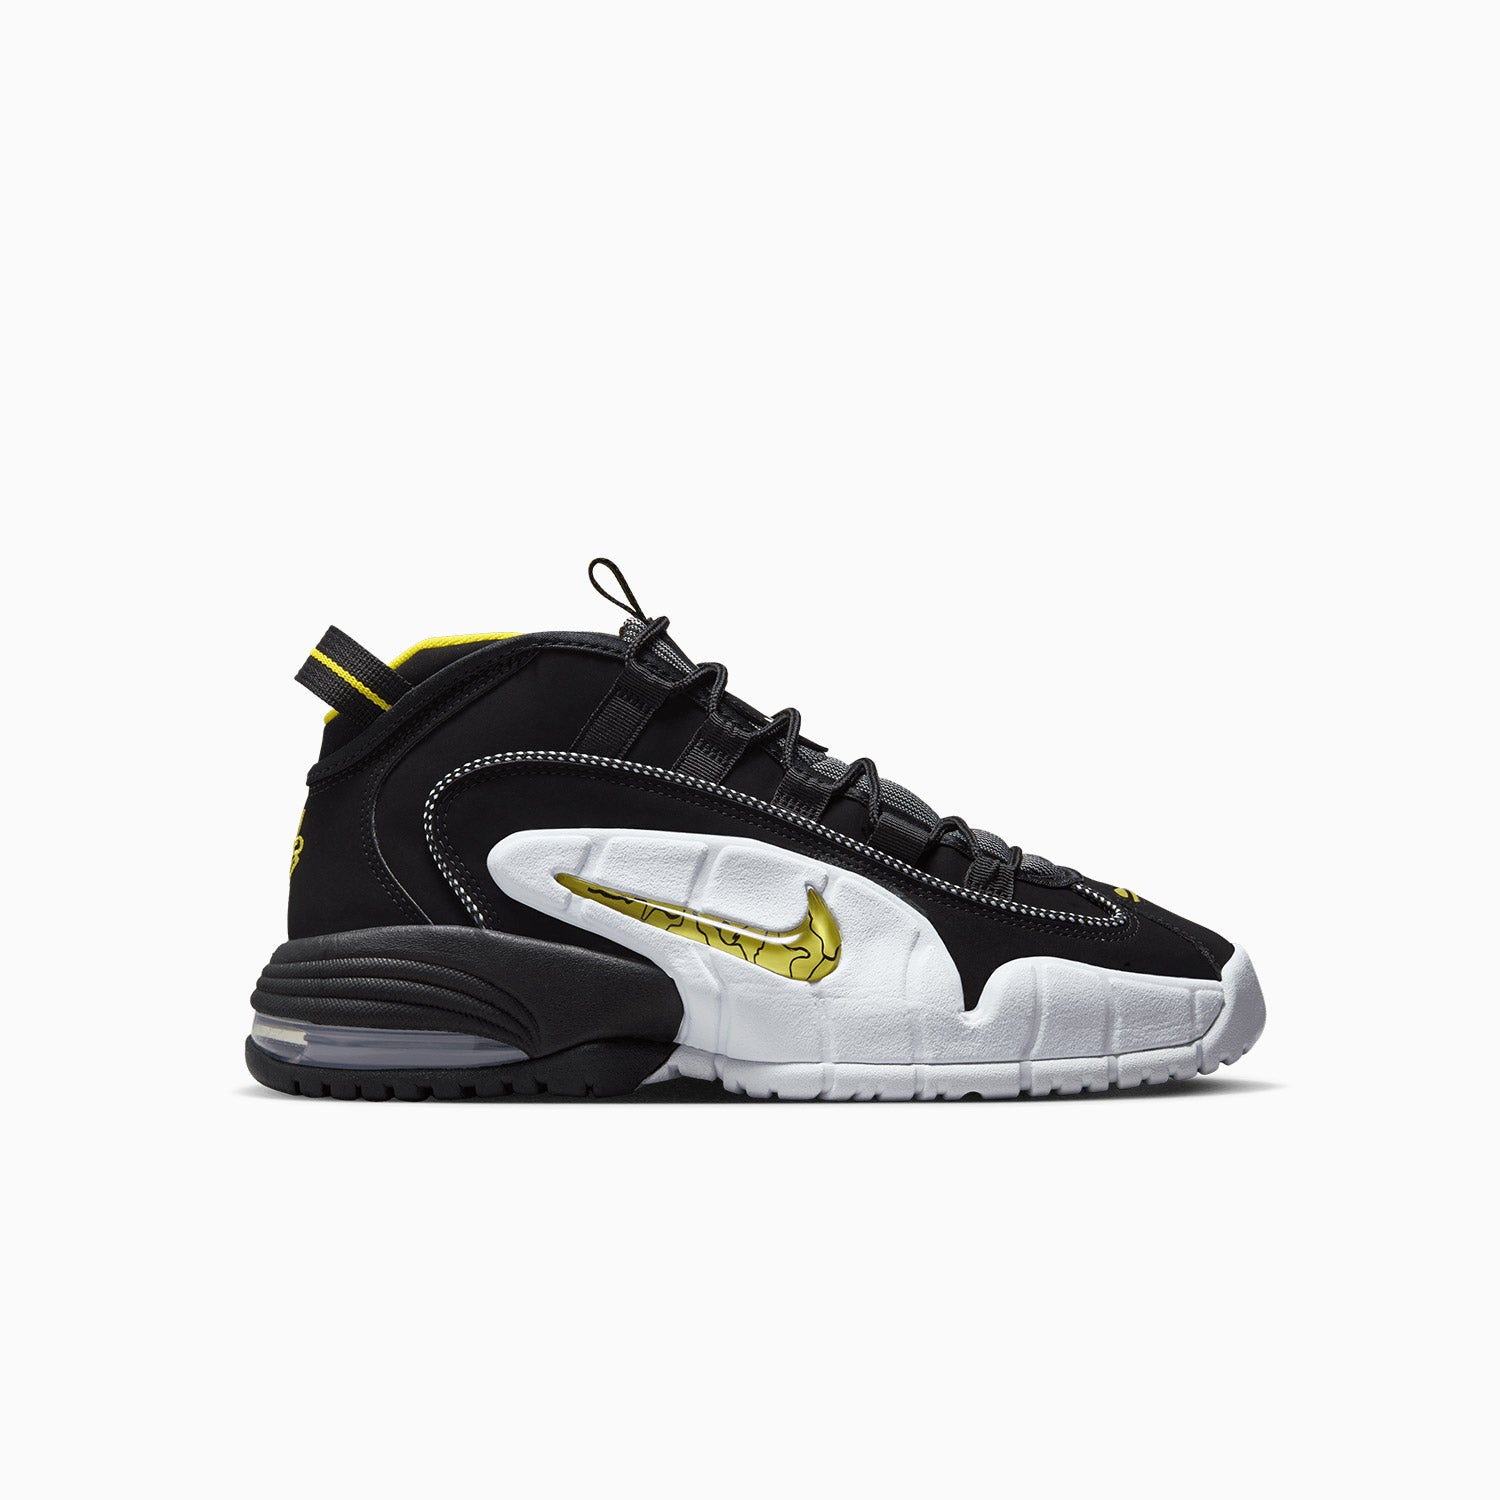 nike-mens-air-max-penny-lester-middle-school-shoes-fn6884-100